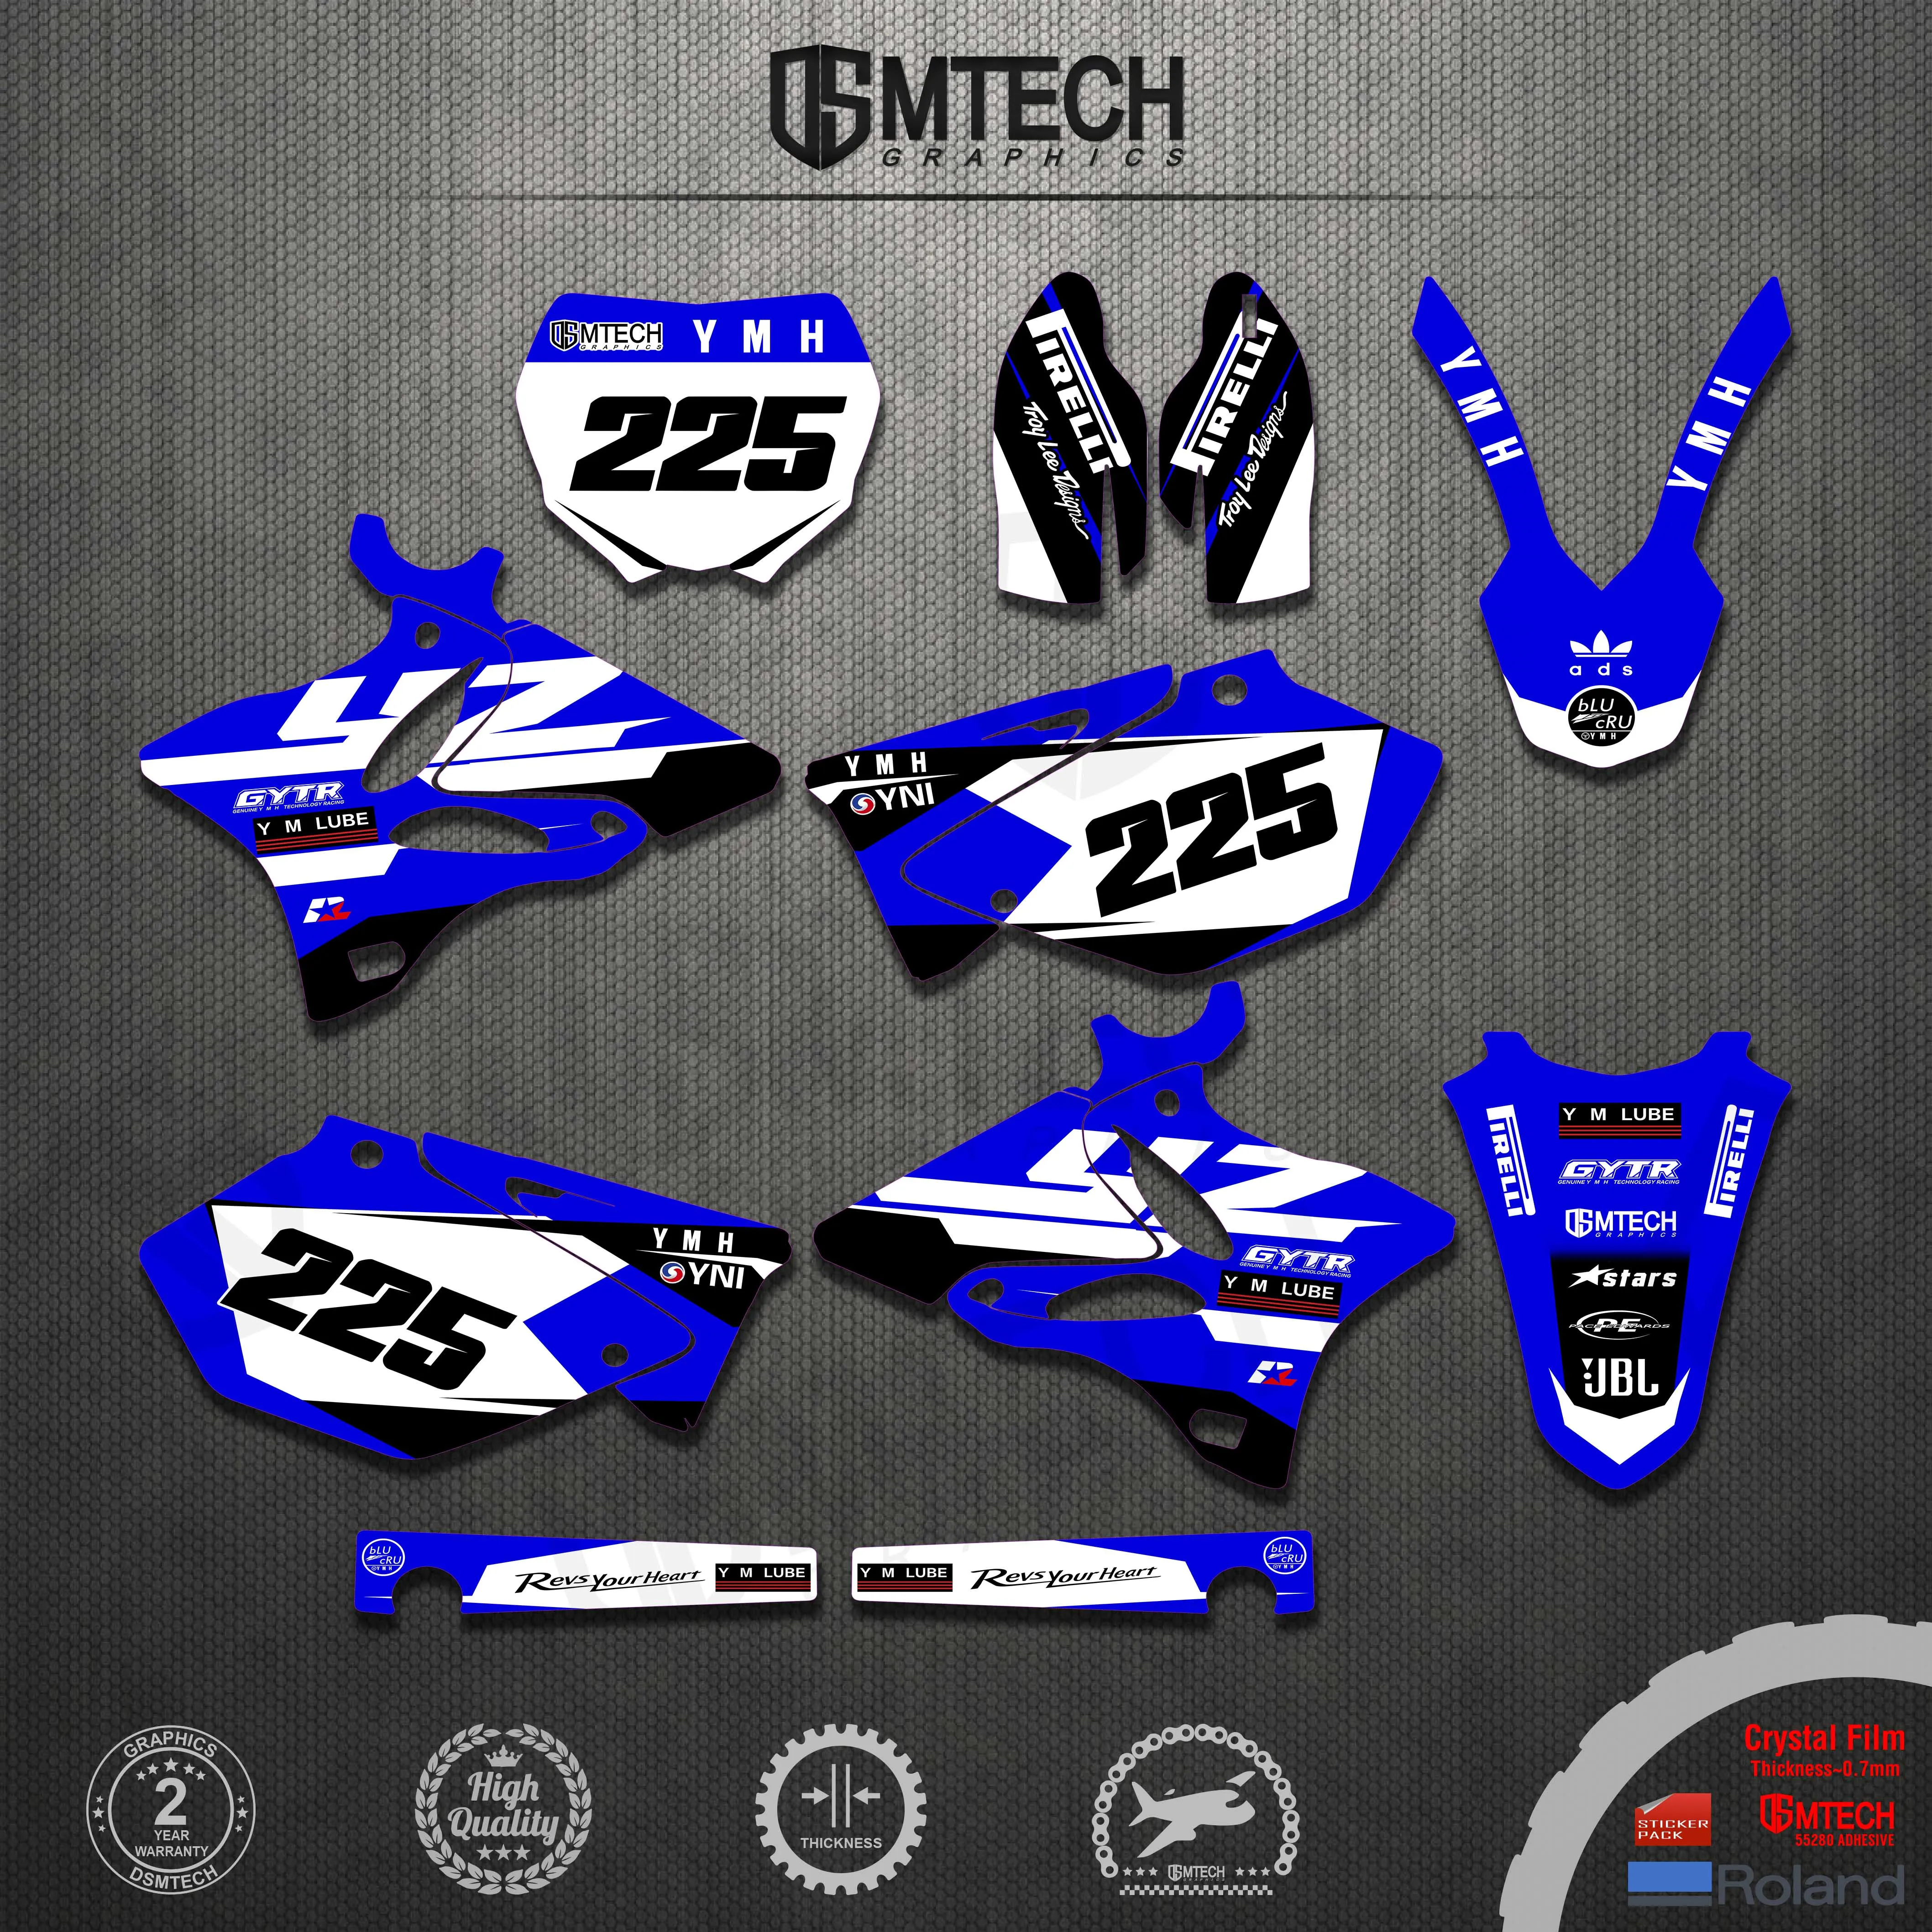 DSMTECH Stickers Decals Graphics kits For YAMAHA YZ125 YZ250 2002- 2005 2006 2007 2008 2009 2010 2011 2012 2013 2014 YZ 250 dsmtech motocross graphics decals stickers deco for yamaha yz85 yz 85 2002 2014 2013 2012 2011 2010 2009 2008 2007 2006motocross